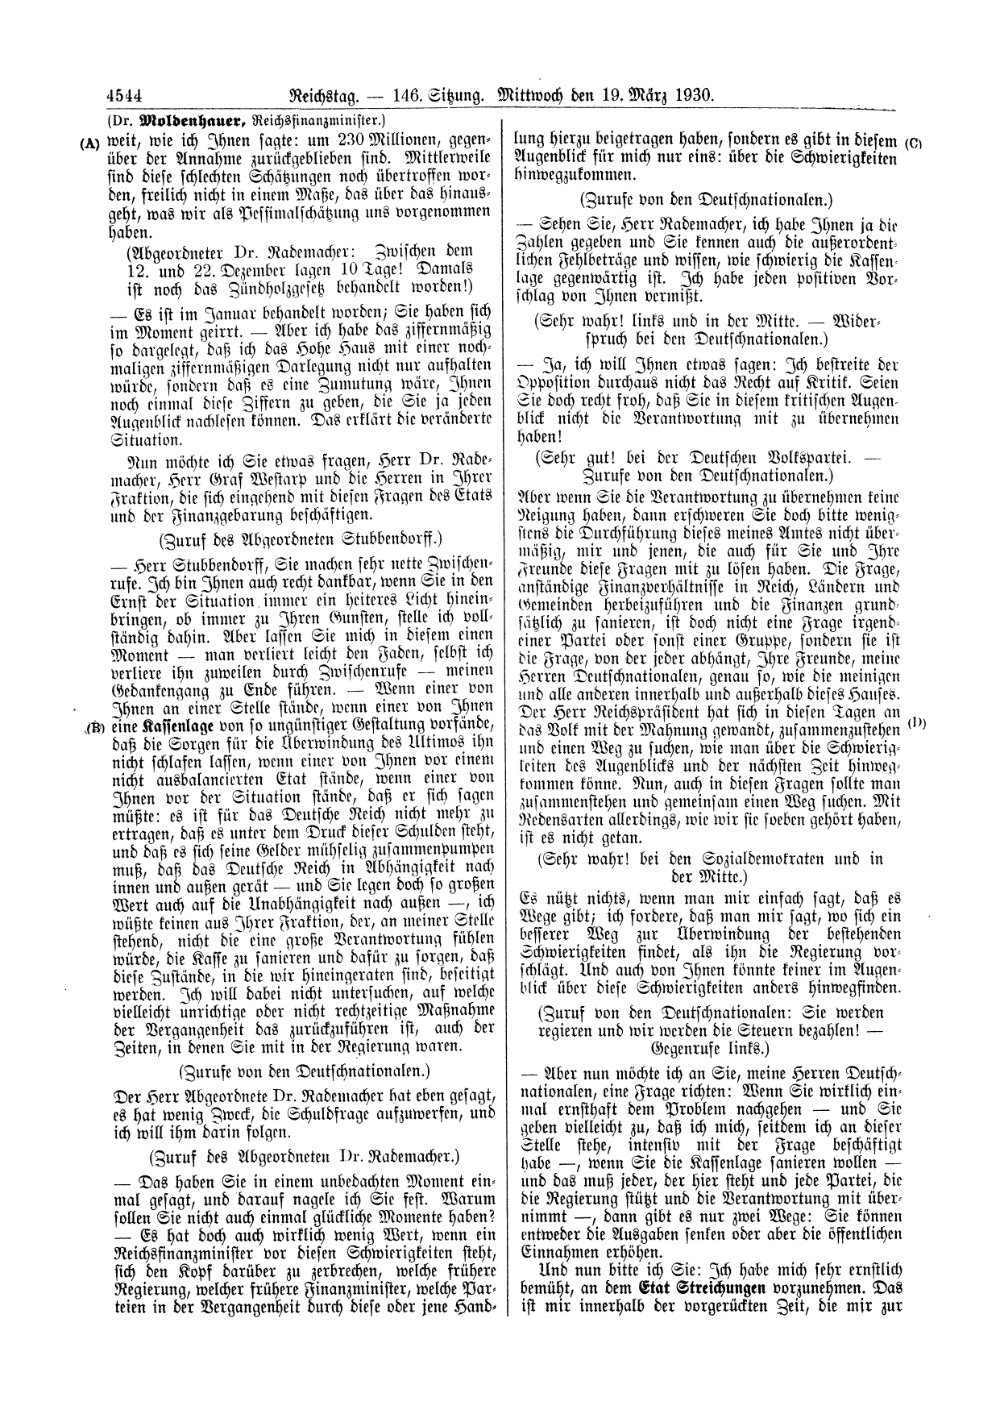 Scan of page 4544